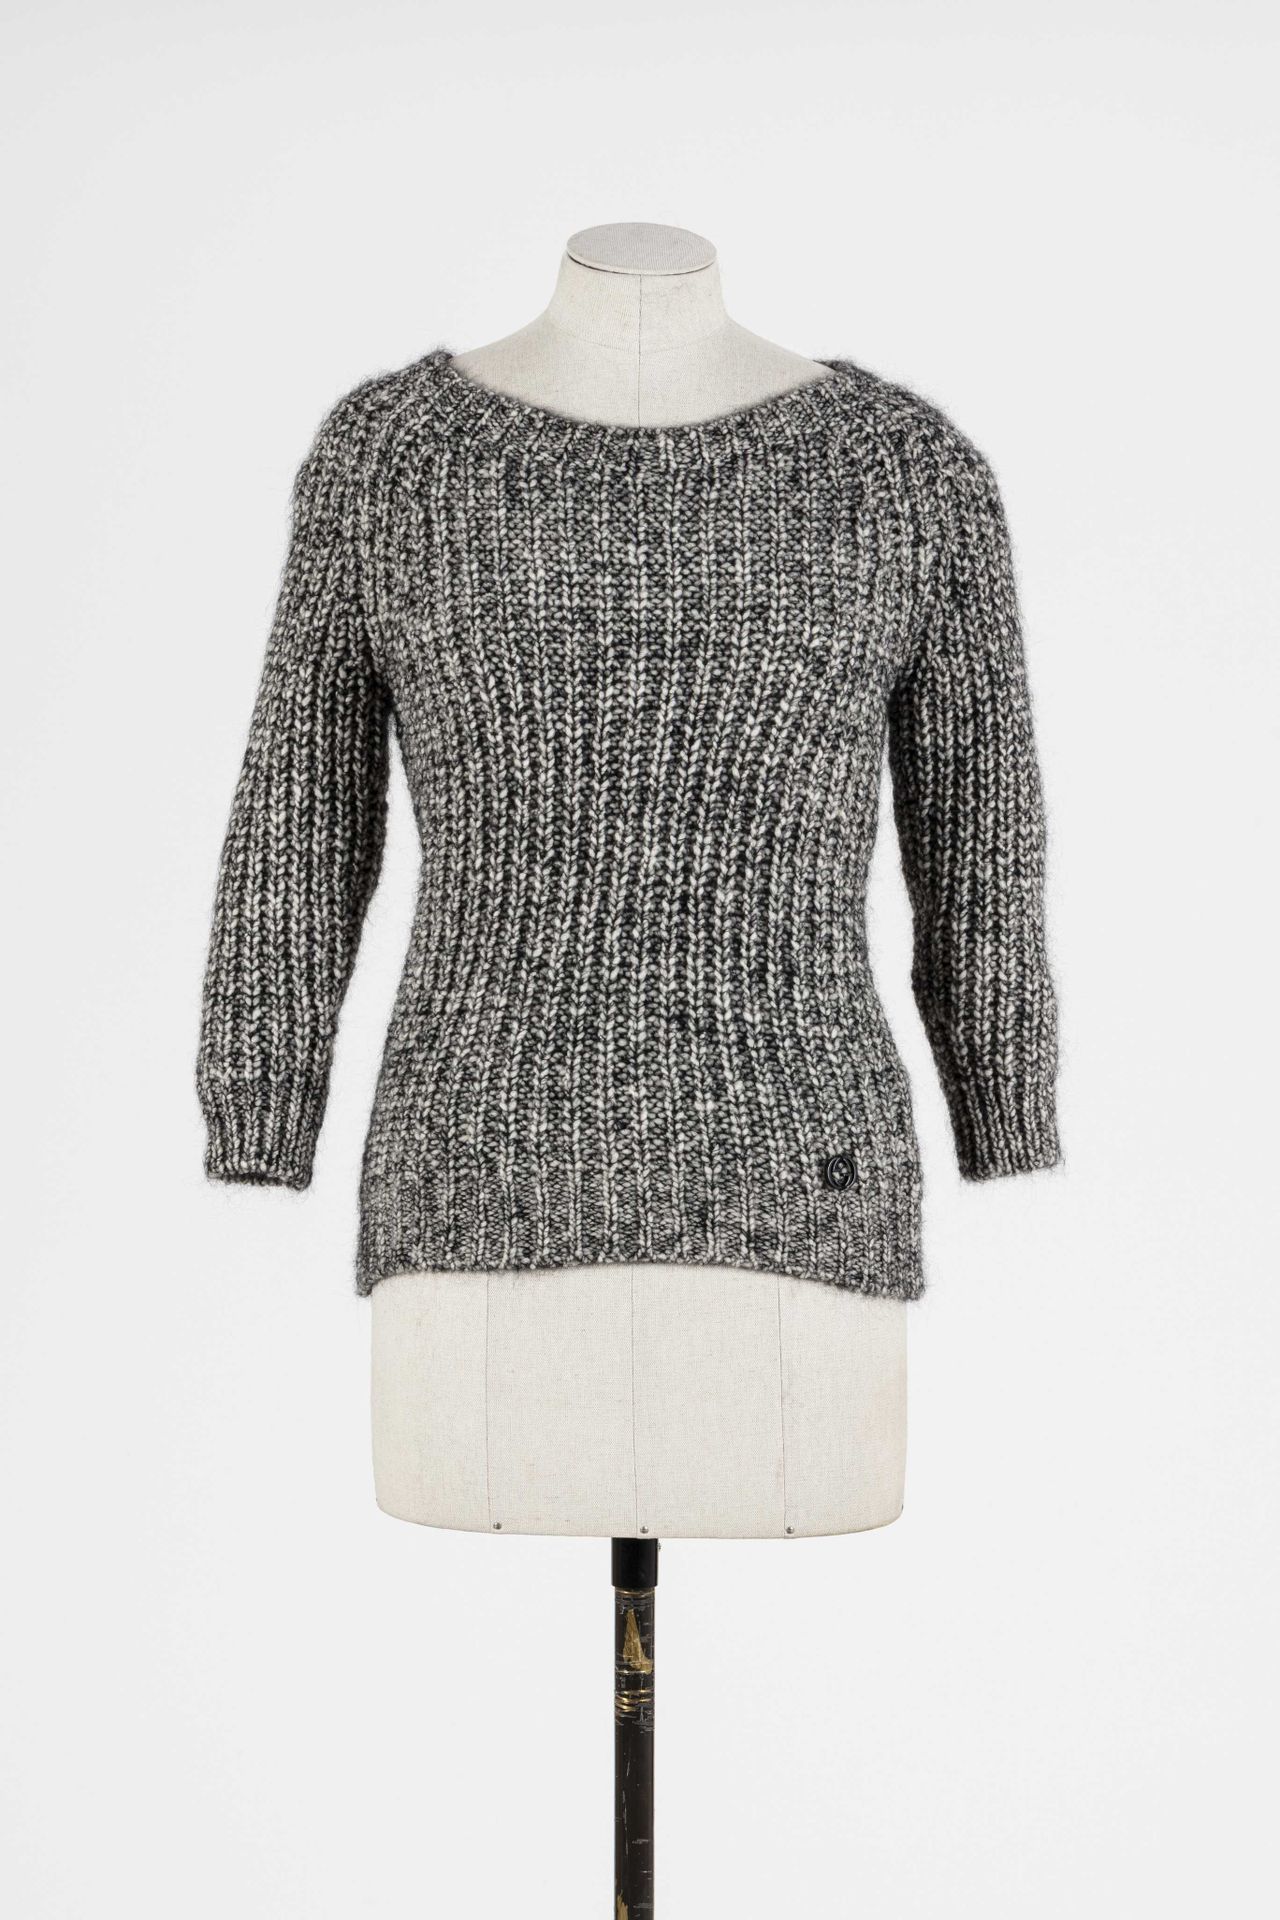 Null GUCCI : pull en laine chiné gris, col rond, manches 3/4. 

T. S